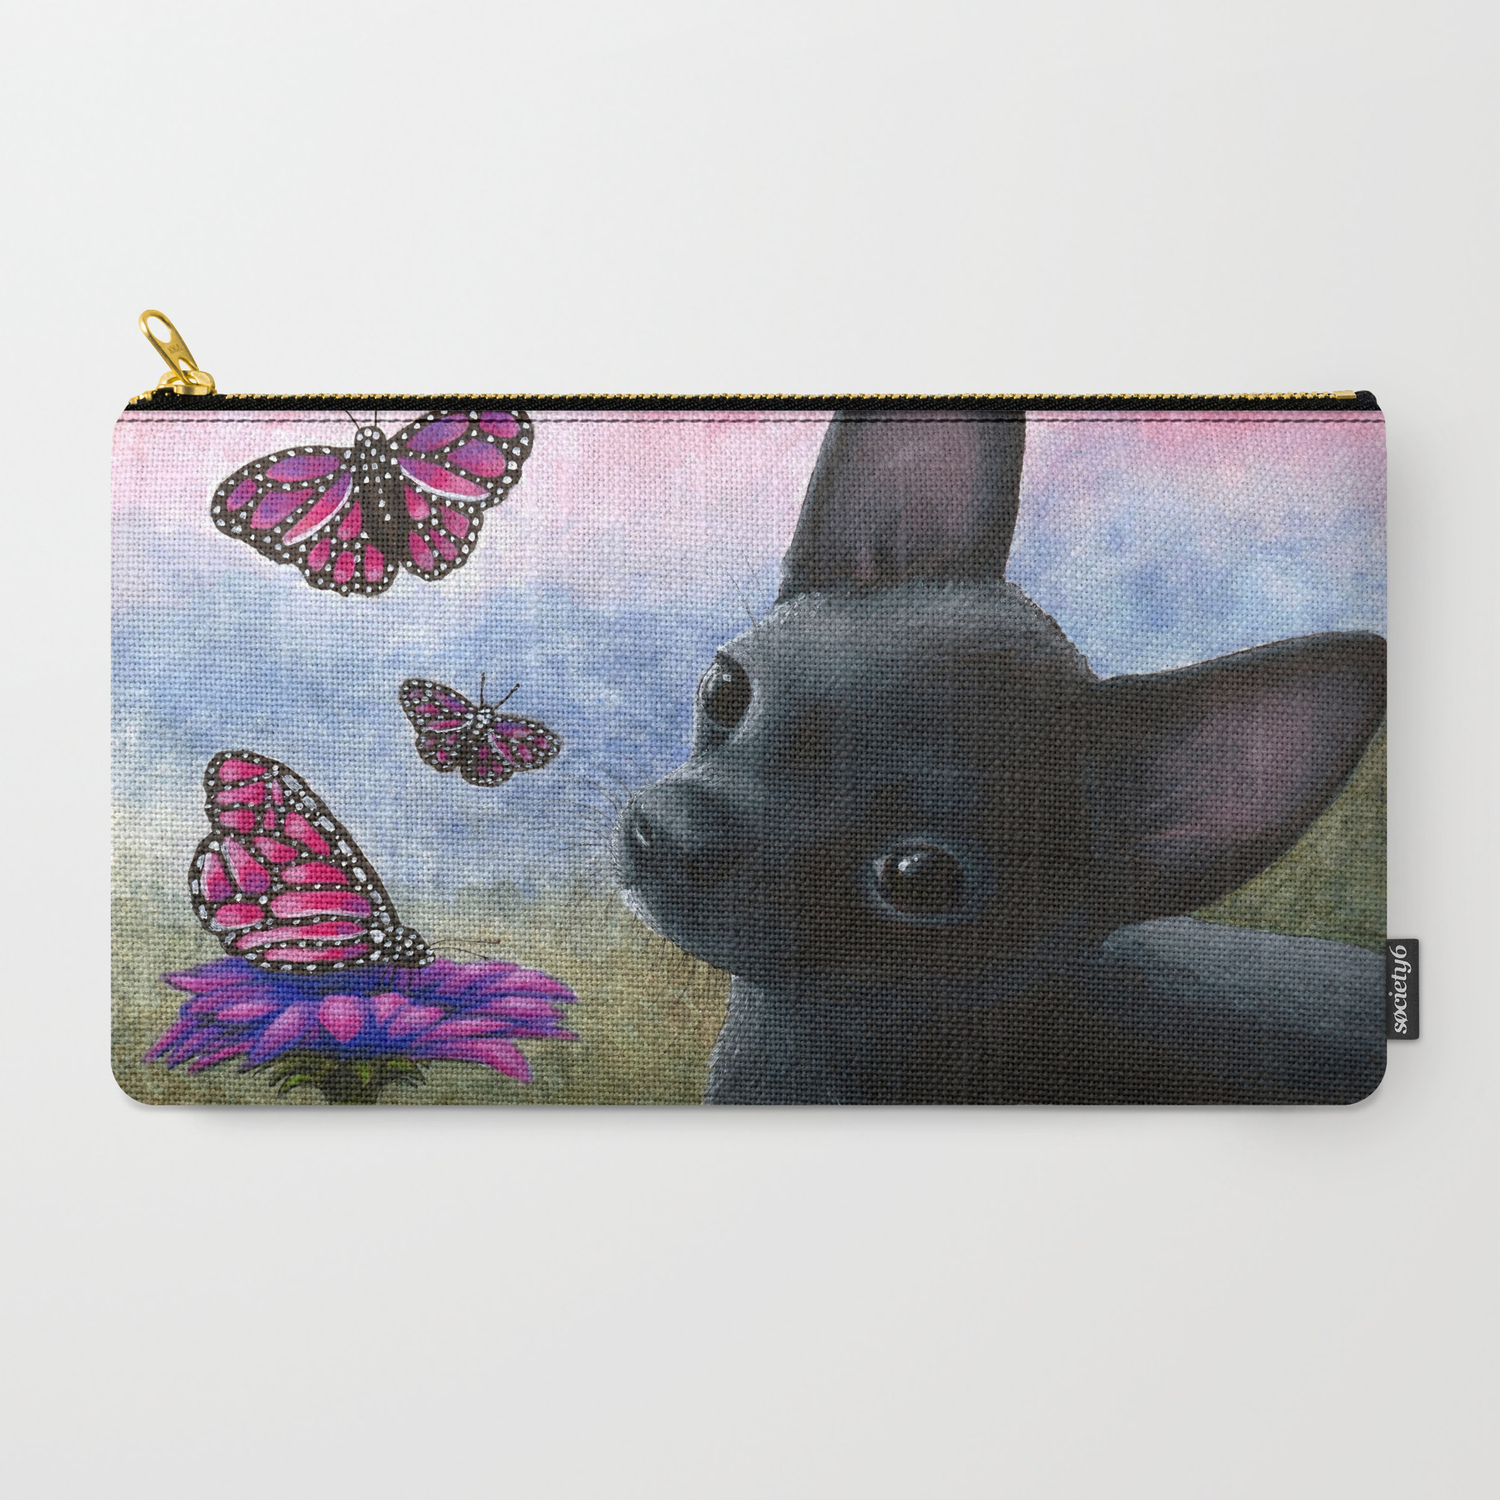 Dog Wallet Purse Black Chihuahua on both sides 